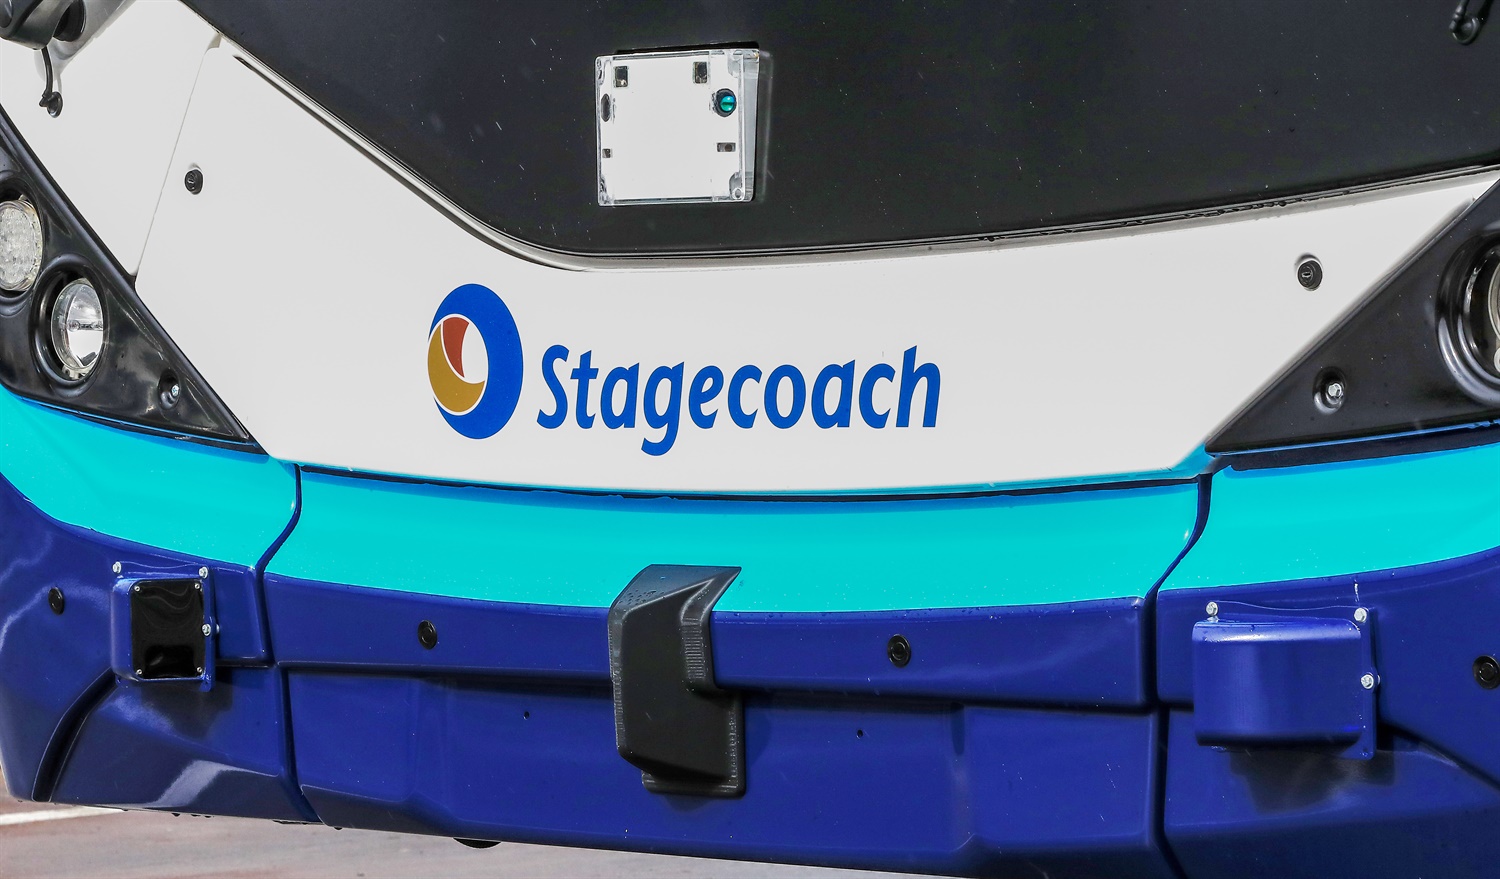 ‘Shocked’ Stagecoach disqualified from three rail franchise bids in row over pensions